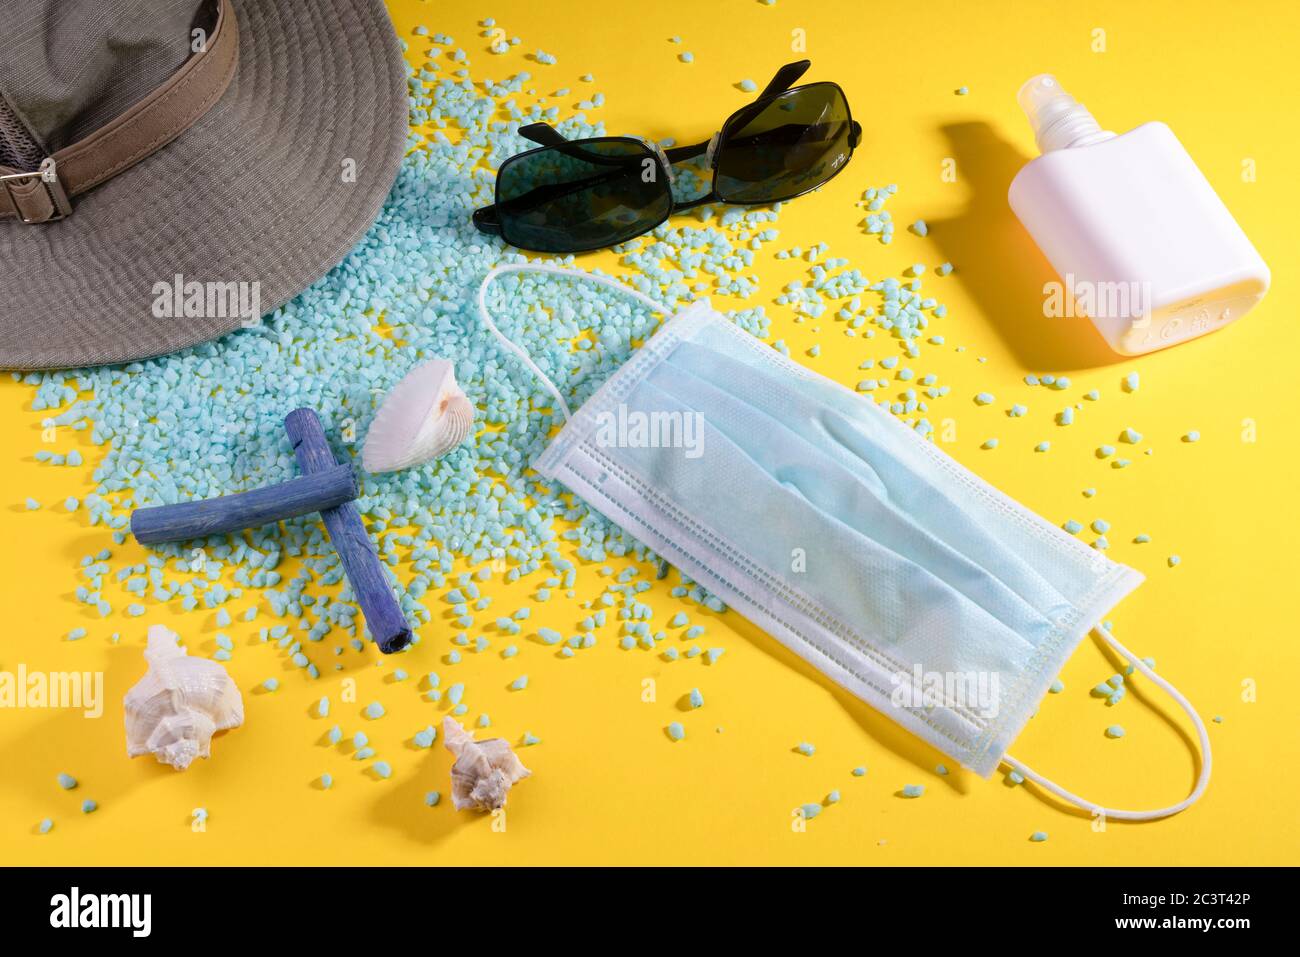 Objects representing the summer of 2020 in a pandemic period from Covid-19 Stock Photo